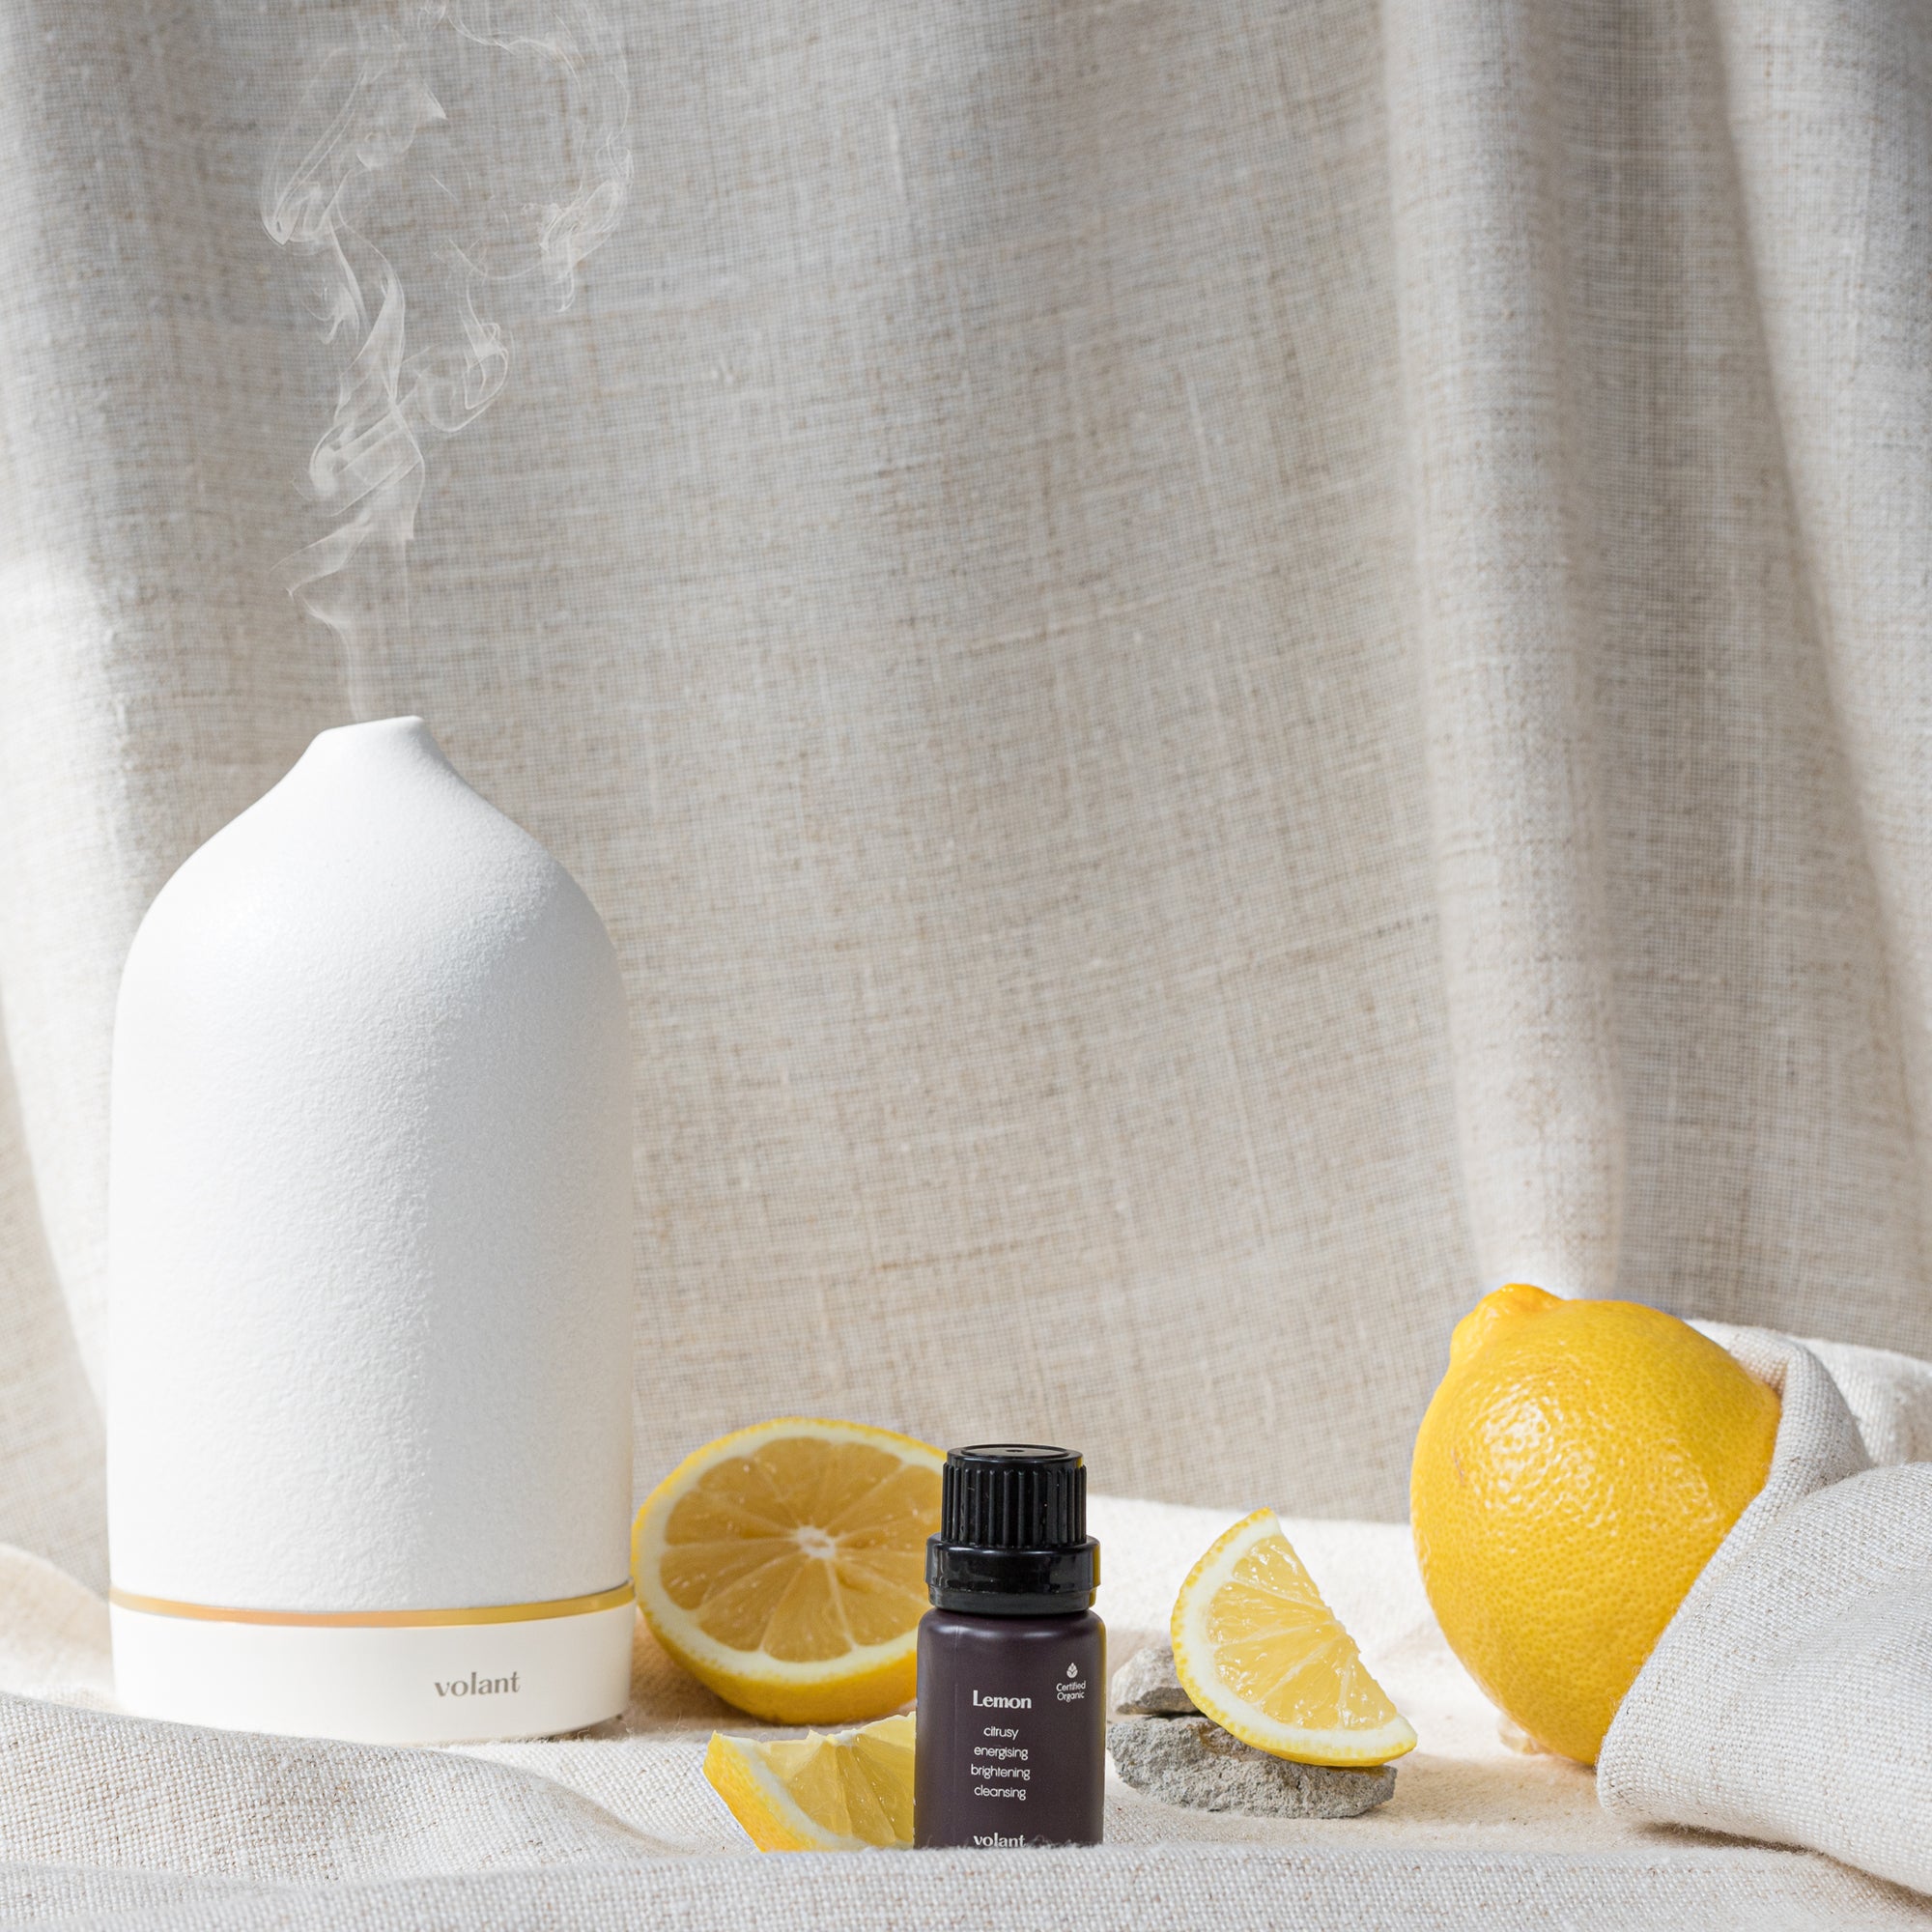 volant white diffuser using organic lemon essential oil to boost your mood